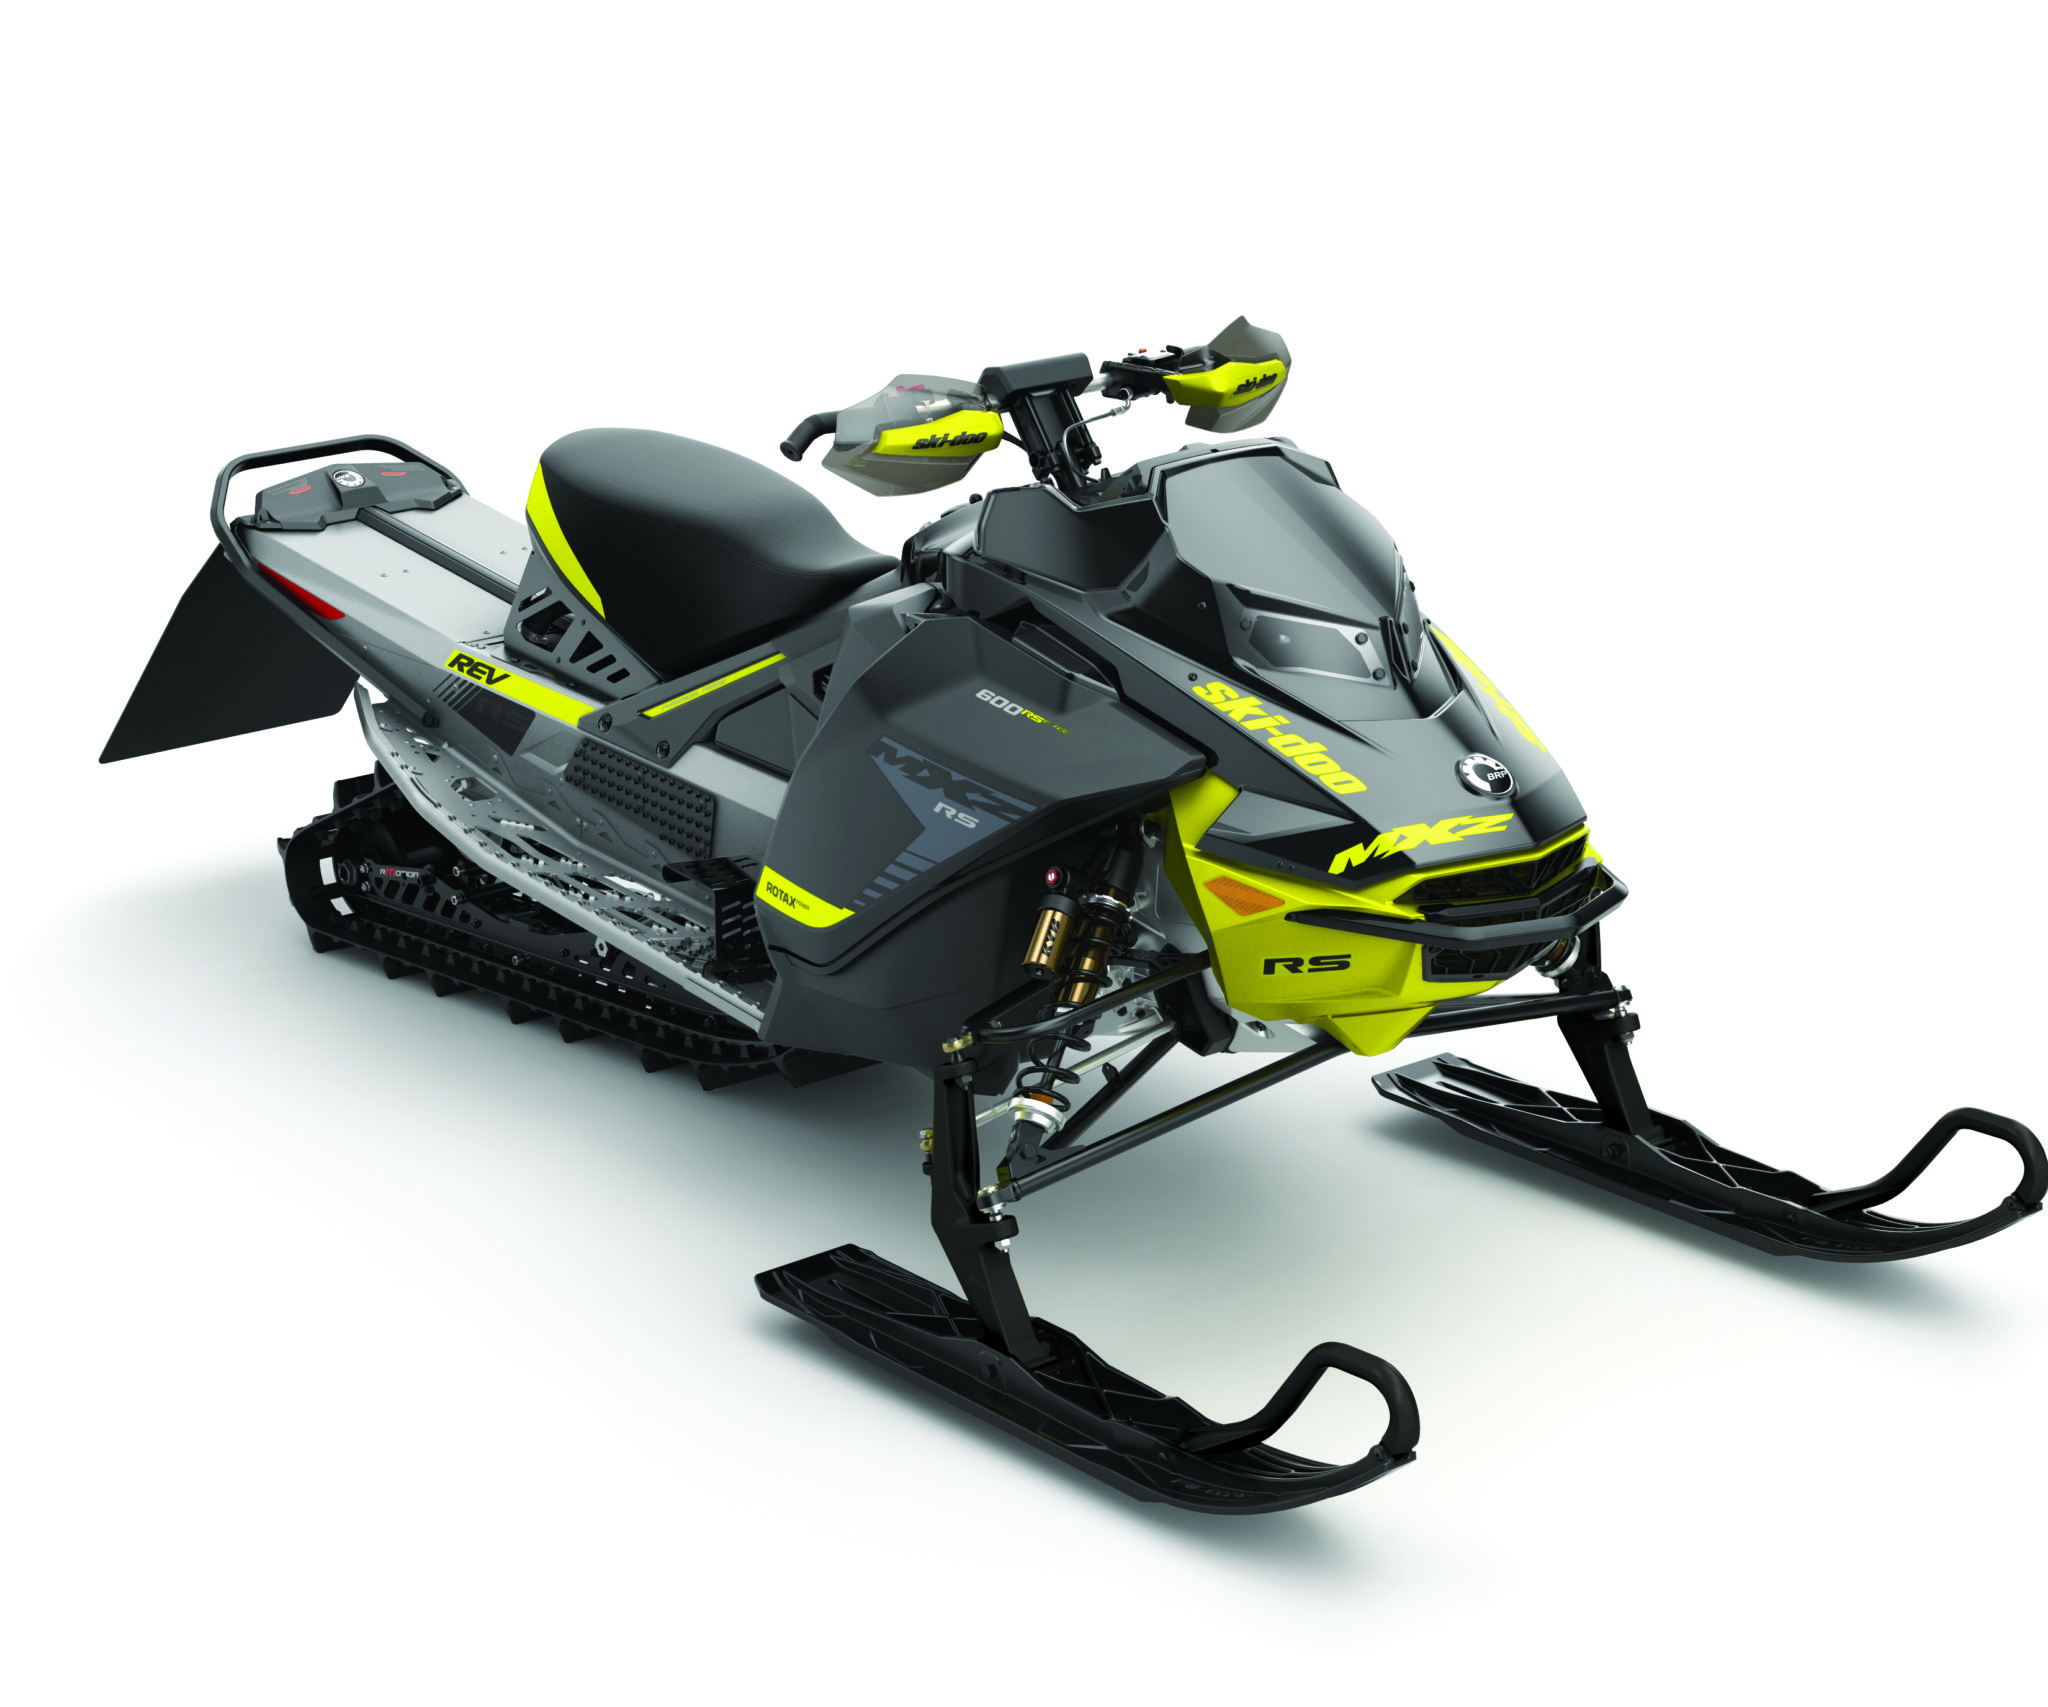 Ski doo 2025. BRP MXZ 600 RS. BRP MXZ 600rs 2012. Ski Doo MXZ 600. Ski-Doo 600 RS.